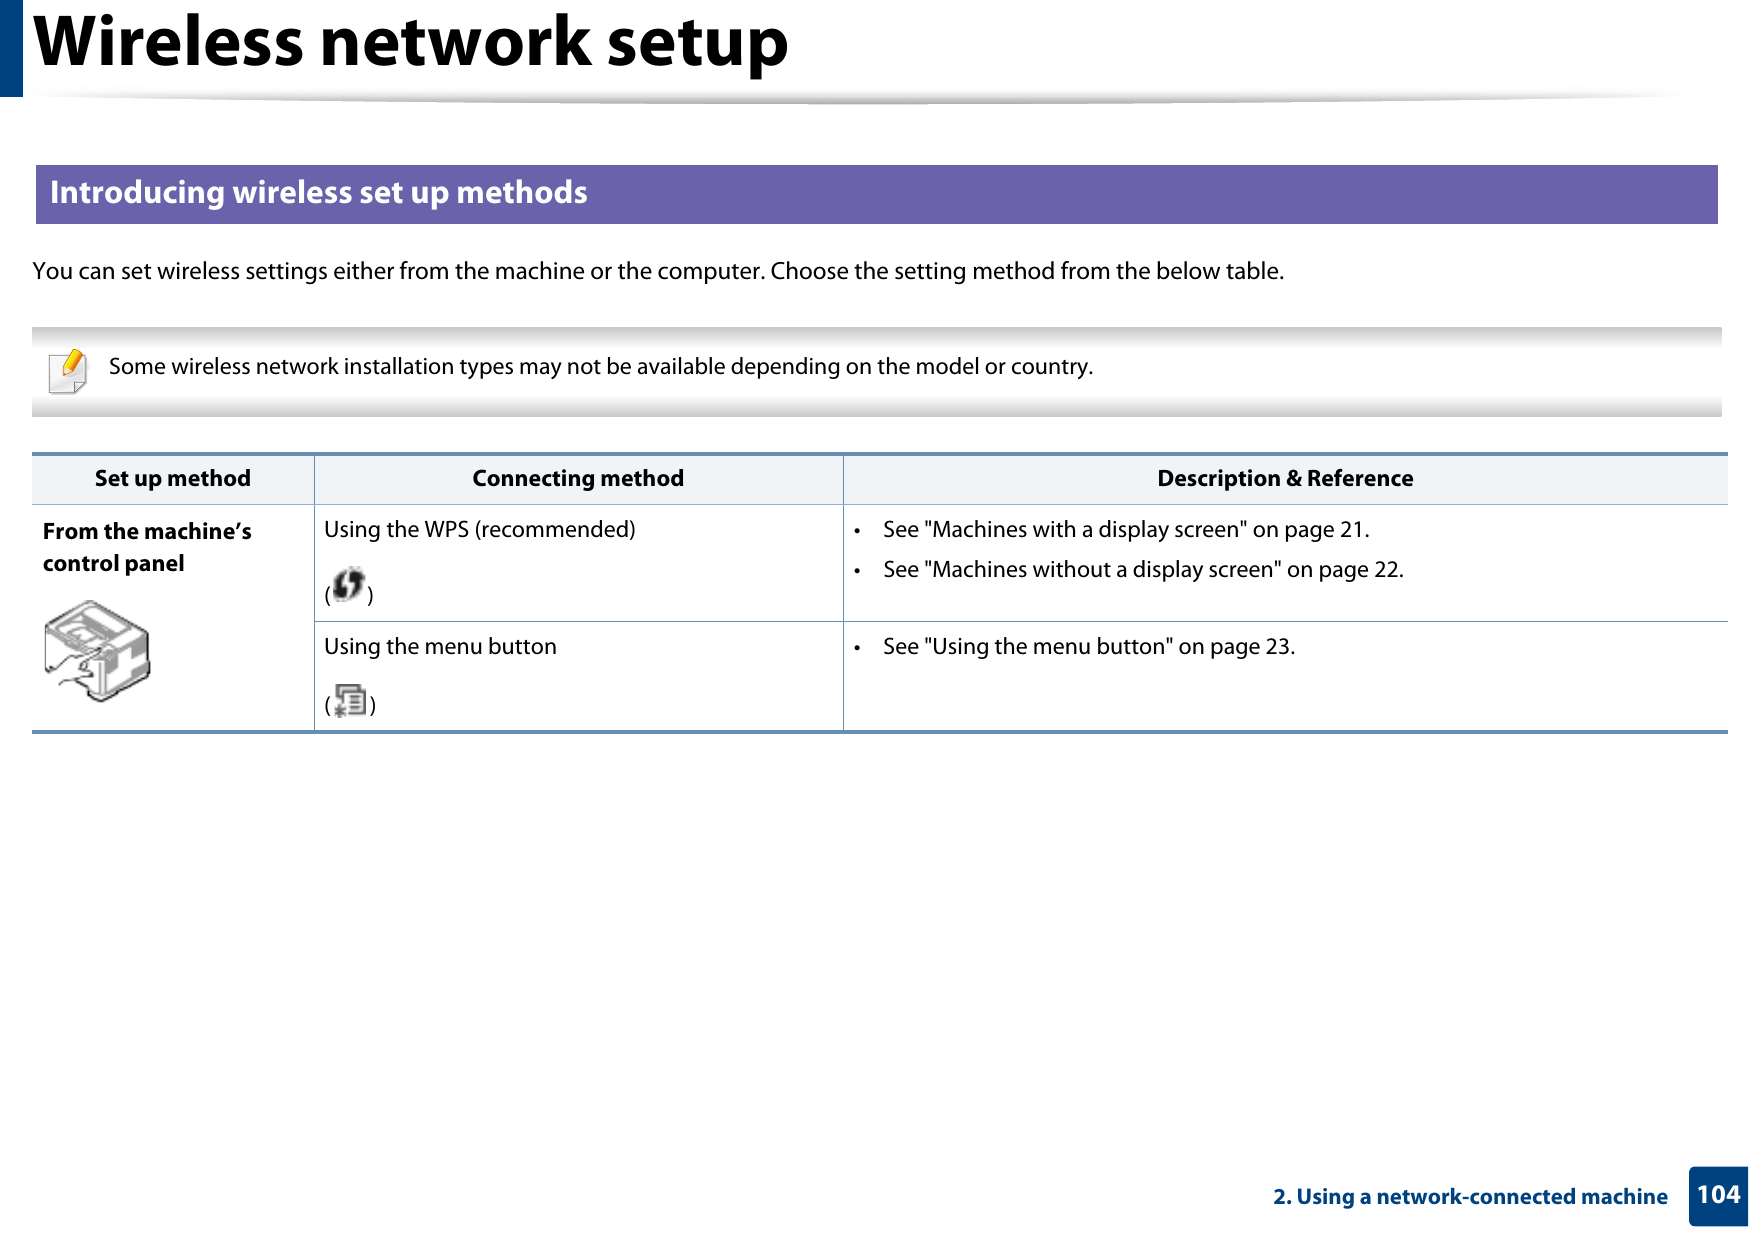 Wireless network setup1042. Using a network-connected machine13 Introducing wireless set up methodsYou can set wireless settings either from the machine or the computer. Choose the setting method from the below table. Some wireless network installation types may not be available depending on the model or country.  Set up method Connecting method Description &amp; ReferenceFrom the machine’s control panelUsing the WPS (recommended)()• See &quot;Machines with a display screen&quot; on page 21.• See &quot;Machines without a display screen&quot; on page 22.Using the menu button()• See &quot;Using the menu button&quot; on page 23.